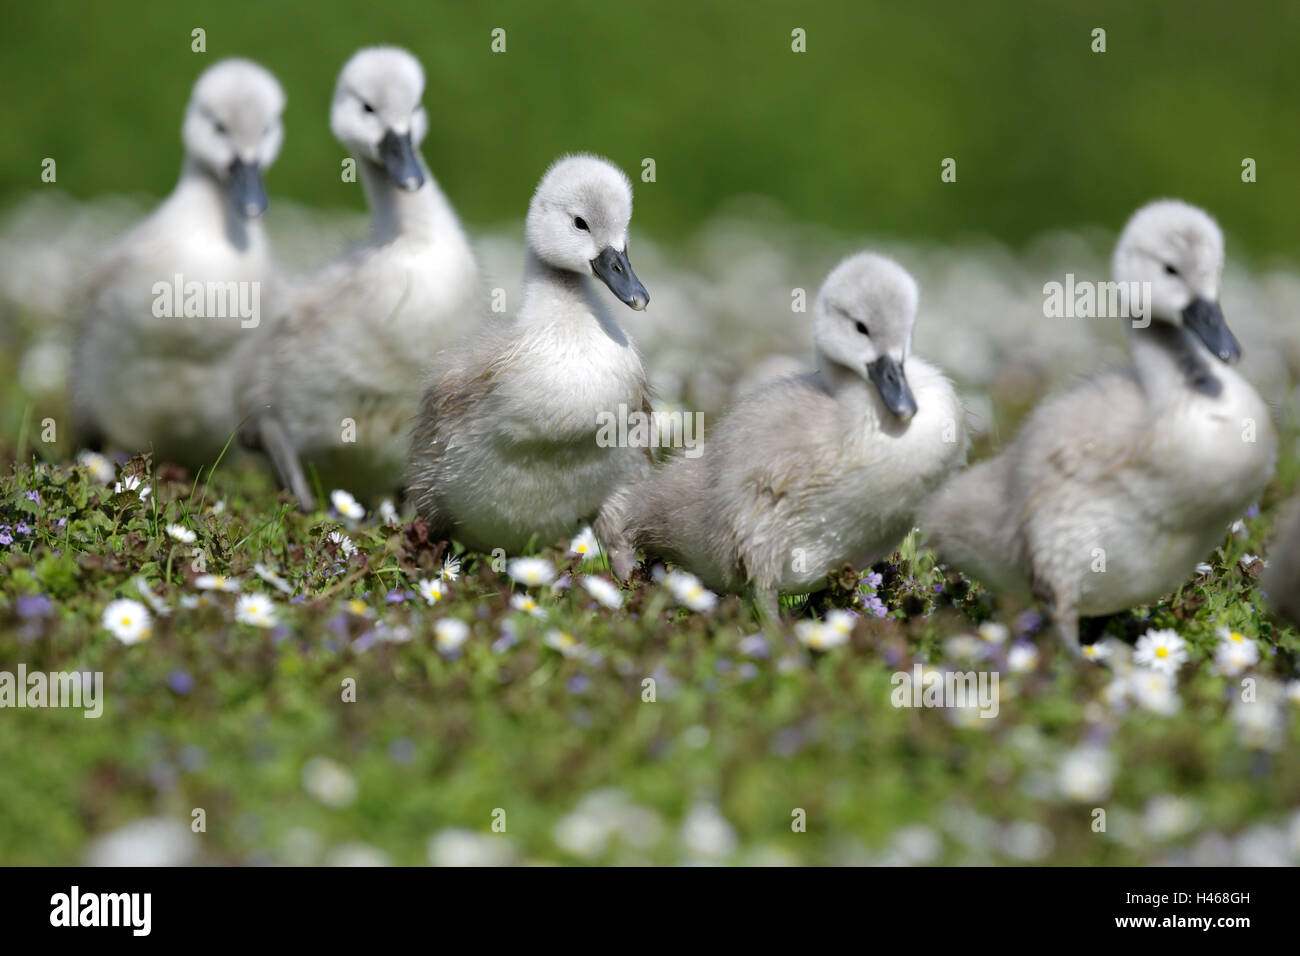 Meadow, hump swan, fledgling, one after the other, animal babies, animals, bird species, duck's birds, swans, swan fledglings, group, row, walk, flowers, daisies, nature, Stock Photo